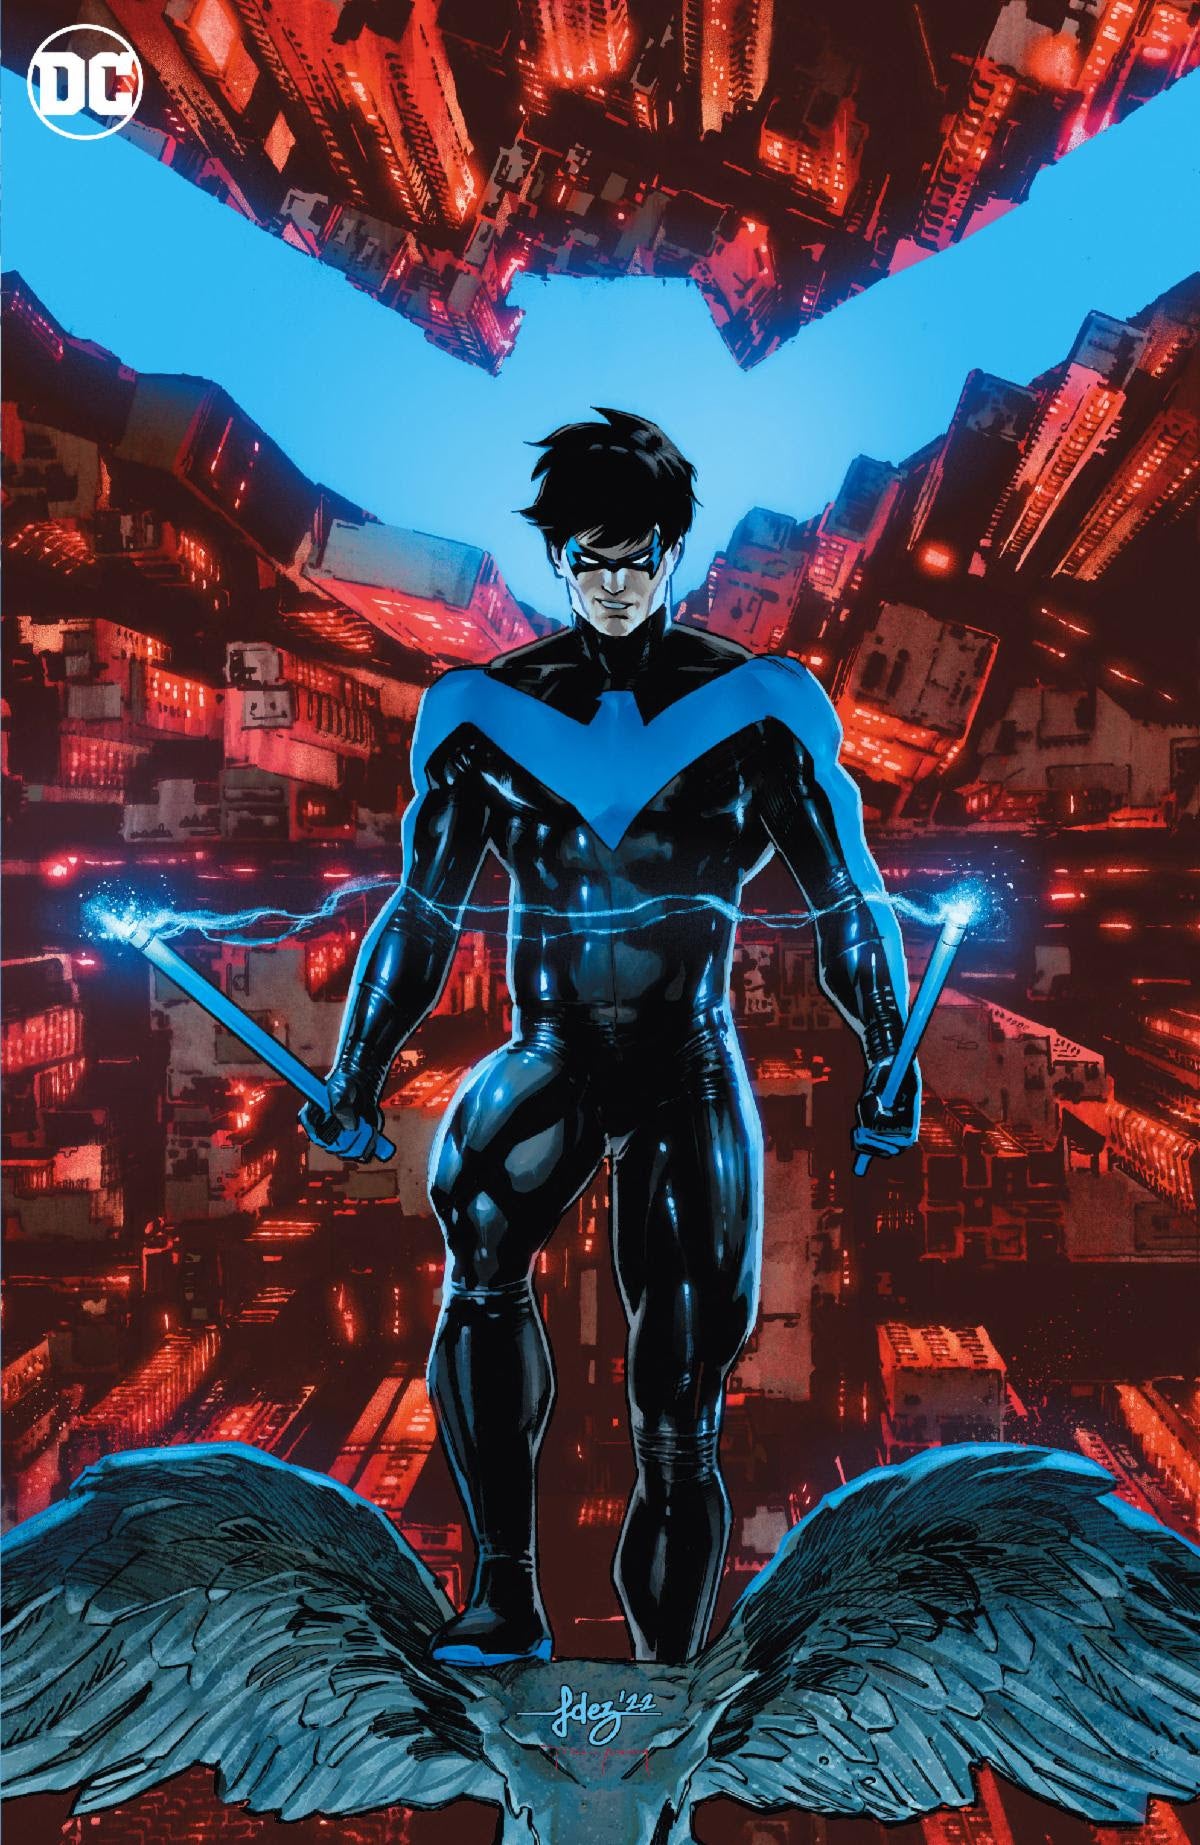 Nightwing #100 variant cover